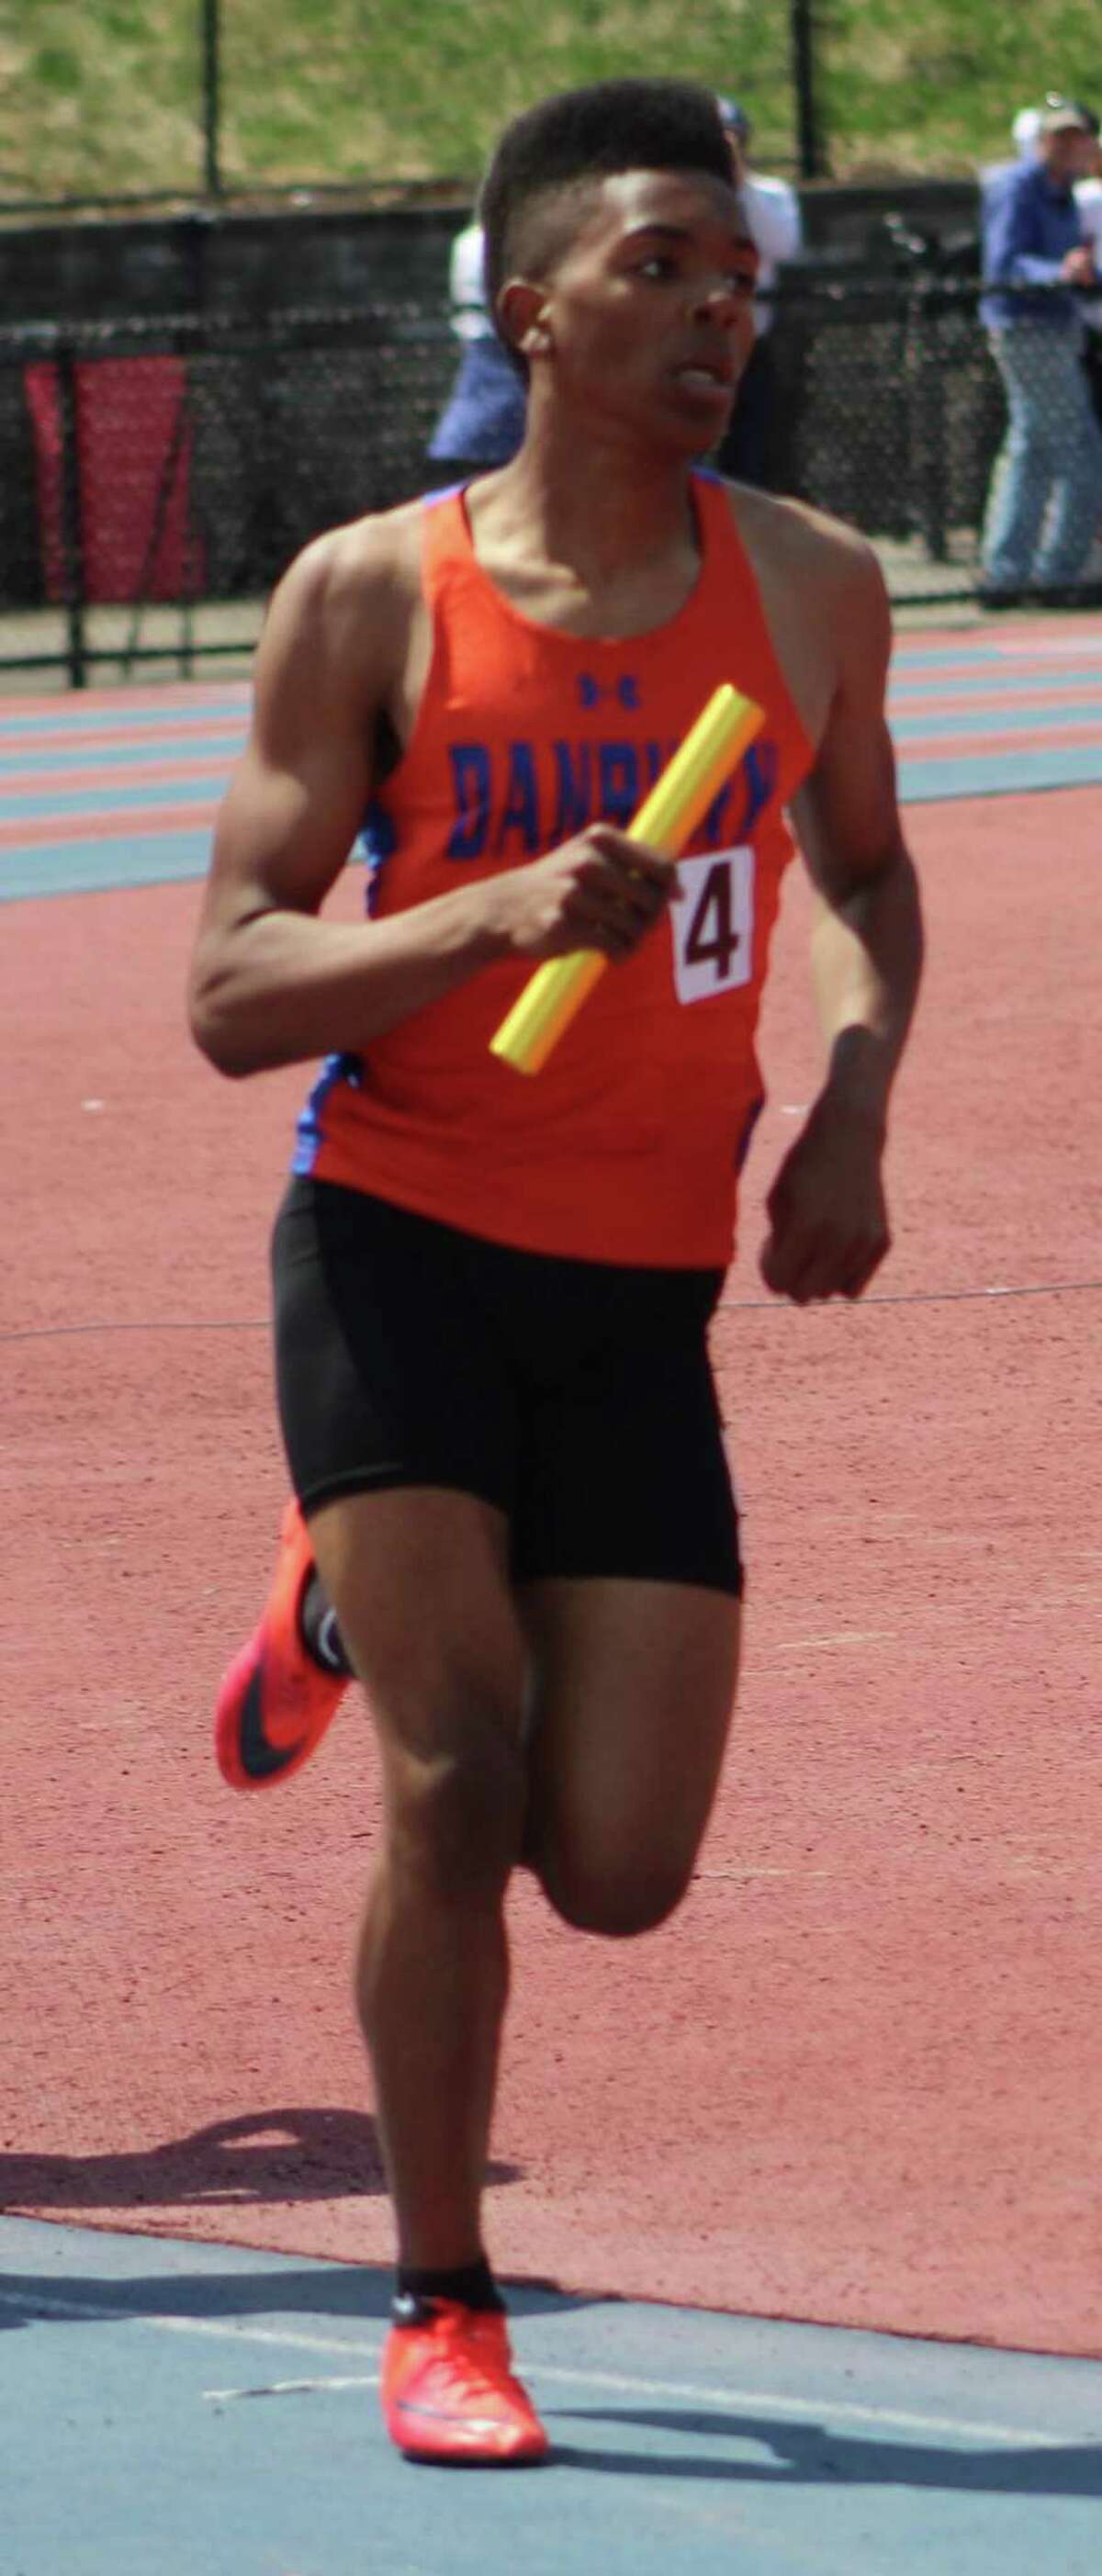 Danbury's Glenroy Ford competes in the boys 4x800 relay at the O'Grady Relays at Danbury High School April 28, 2018.